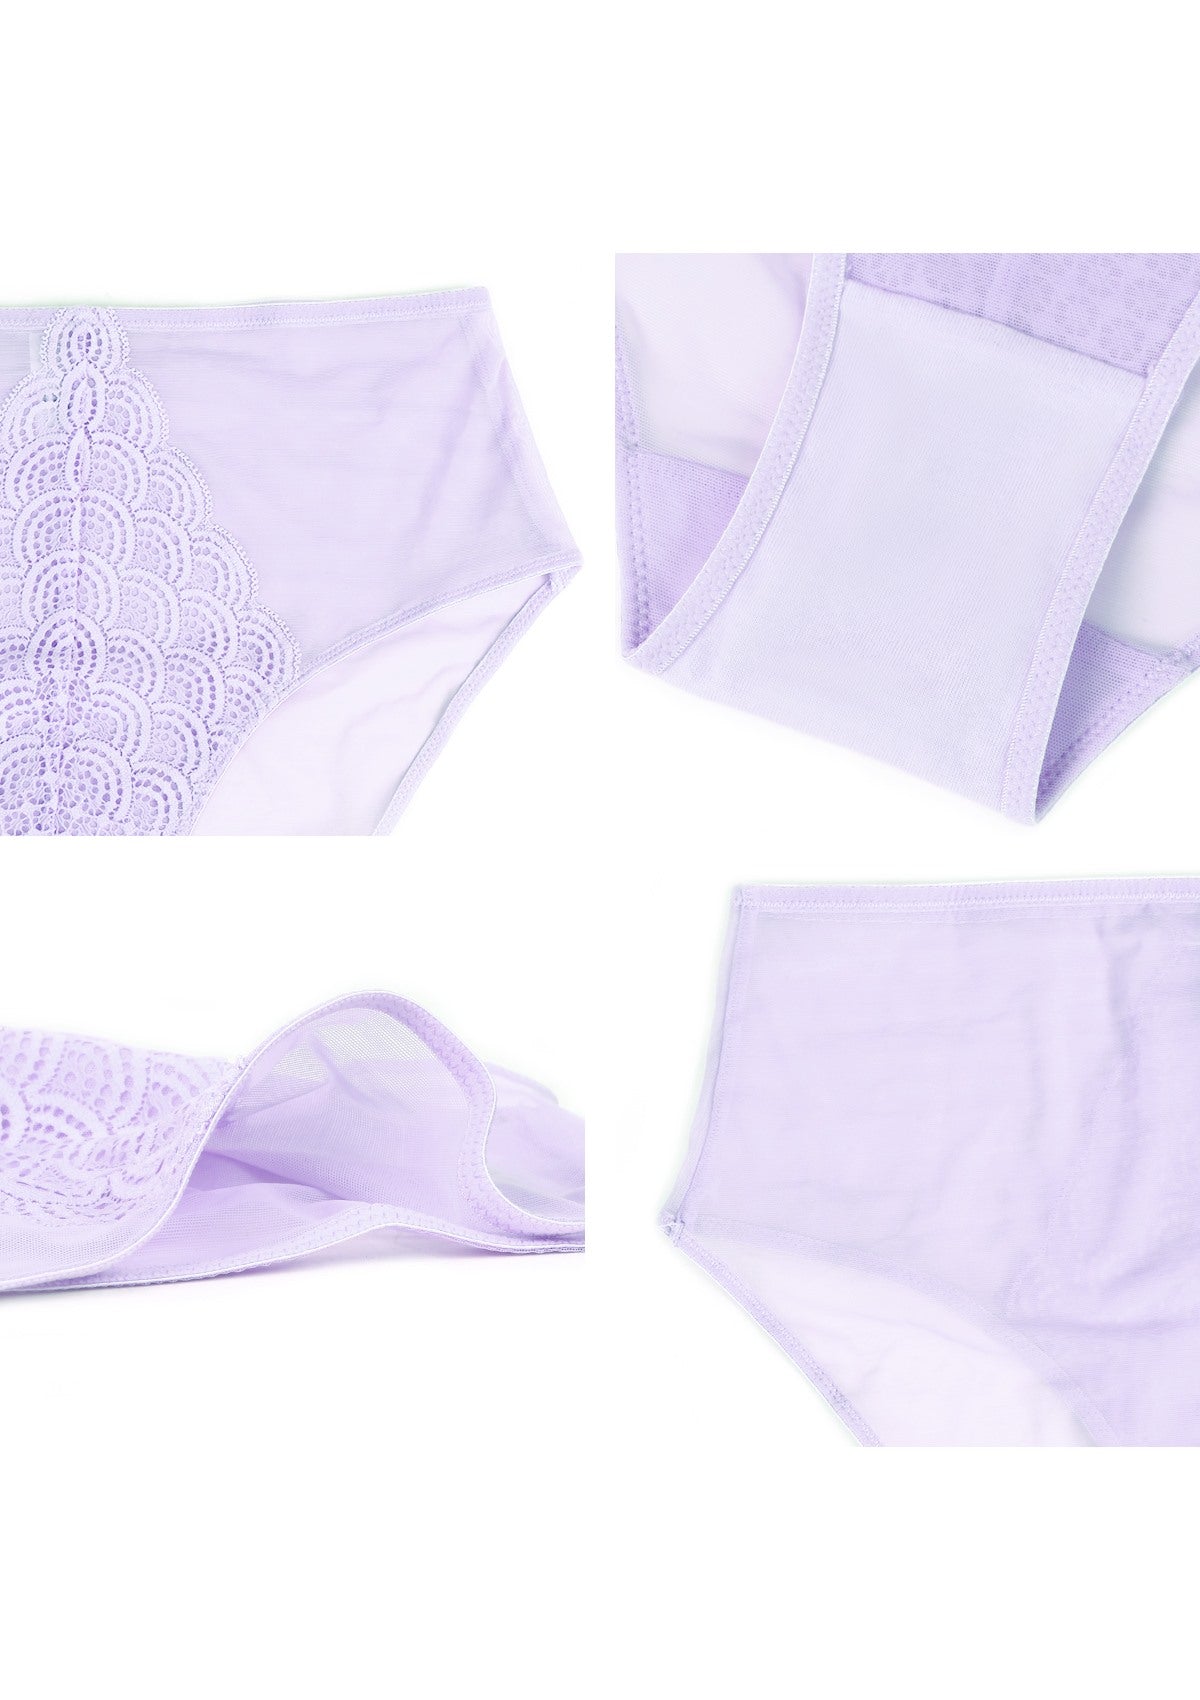 HSIA Spring Romance High-Rise Floral Lacy Panty-Comfort In Style - M / Light Purple